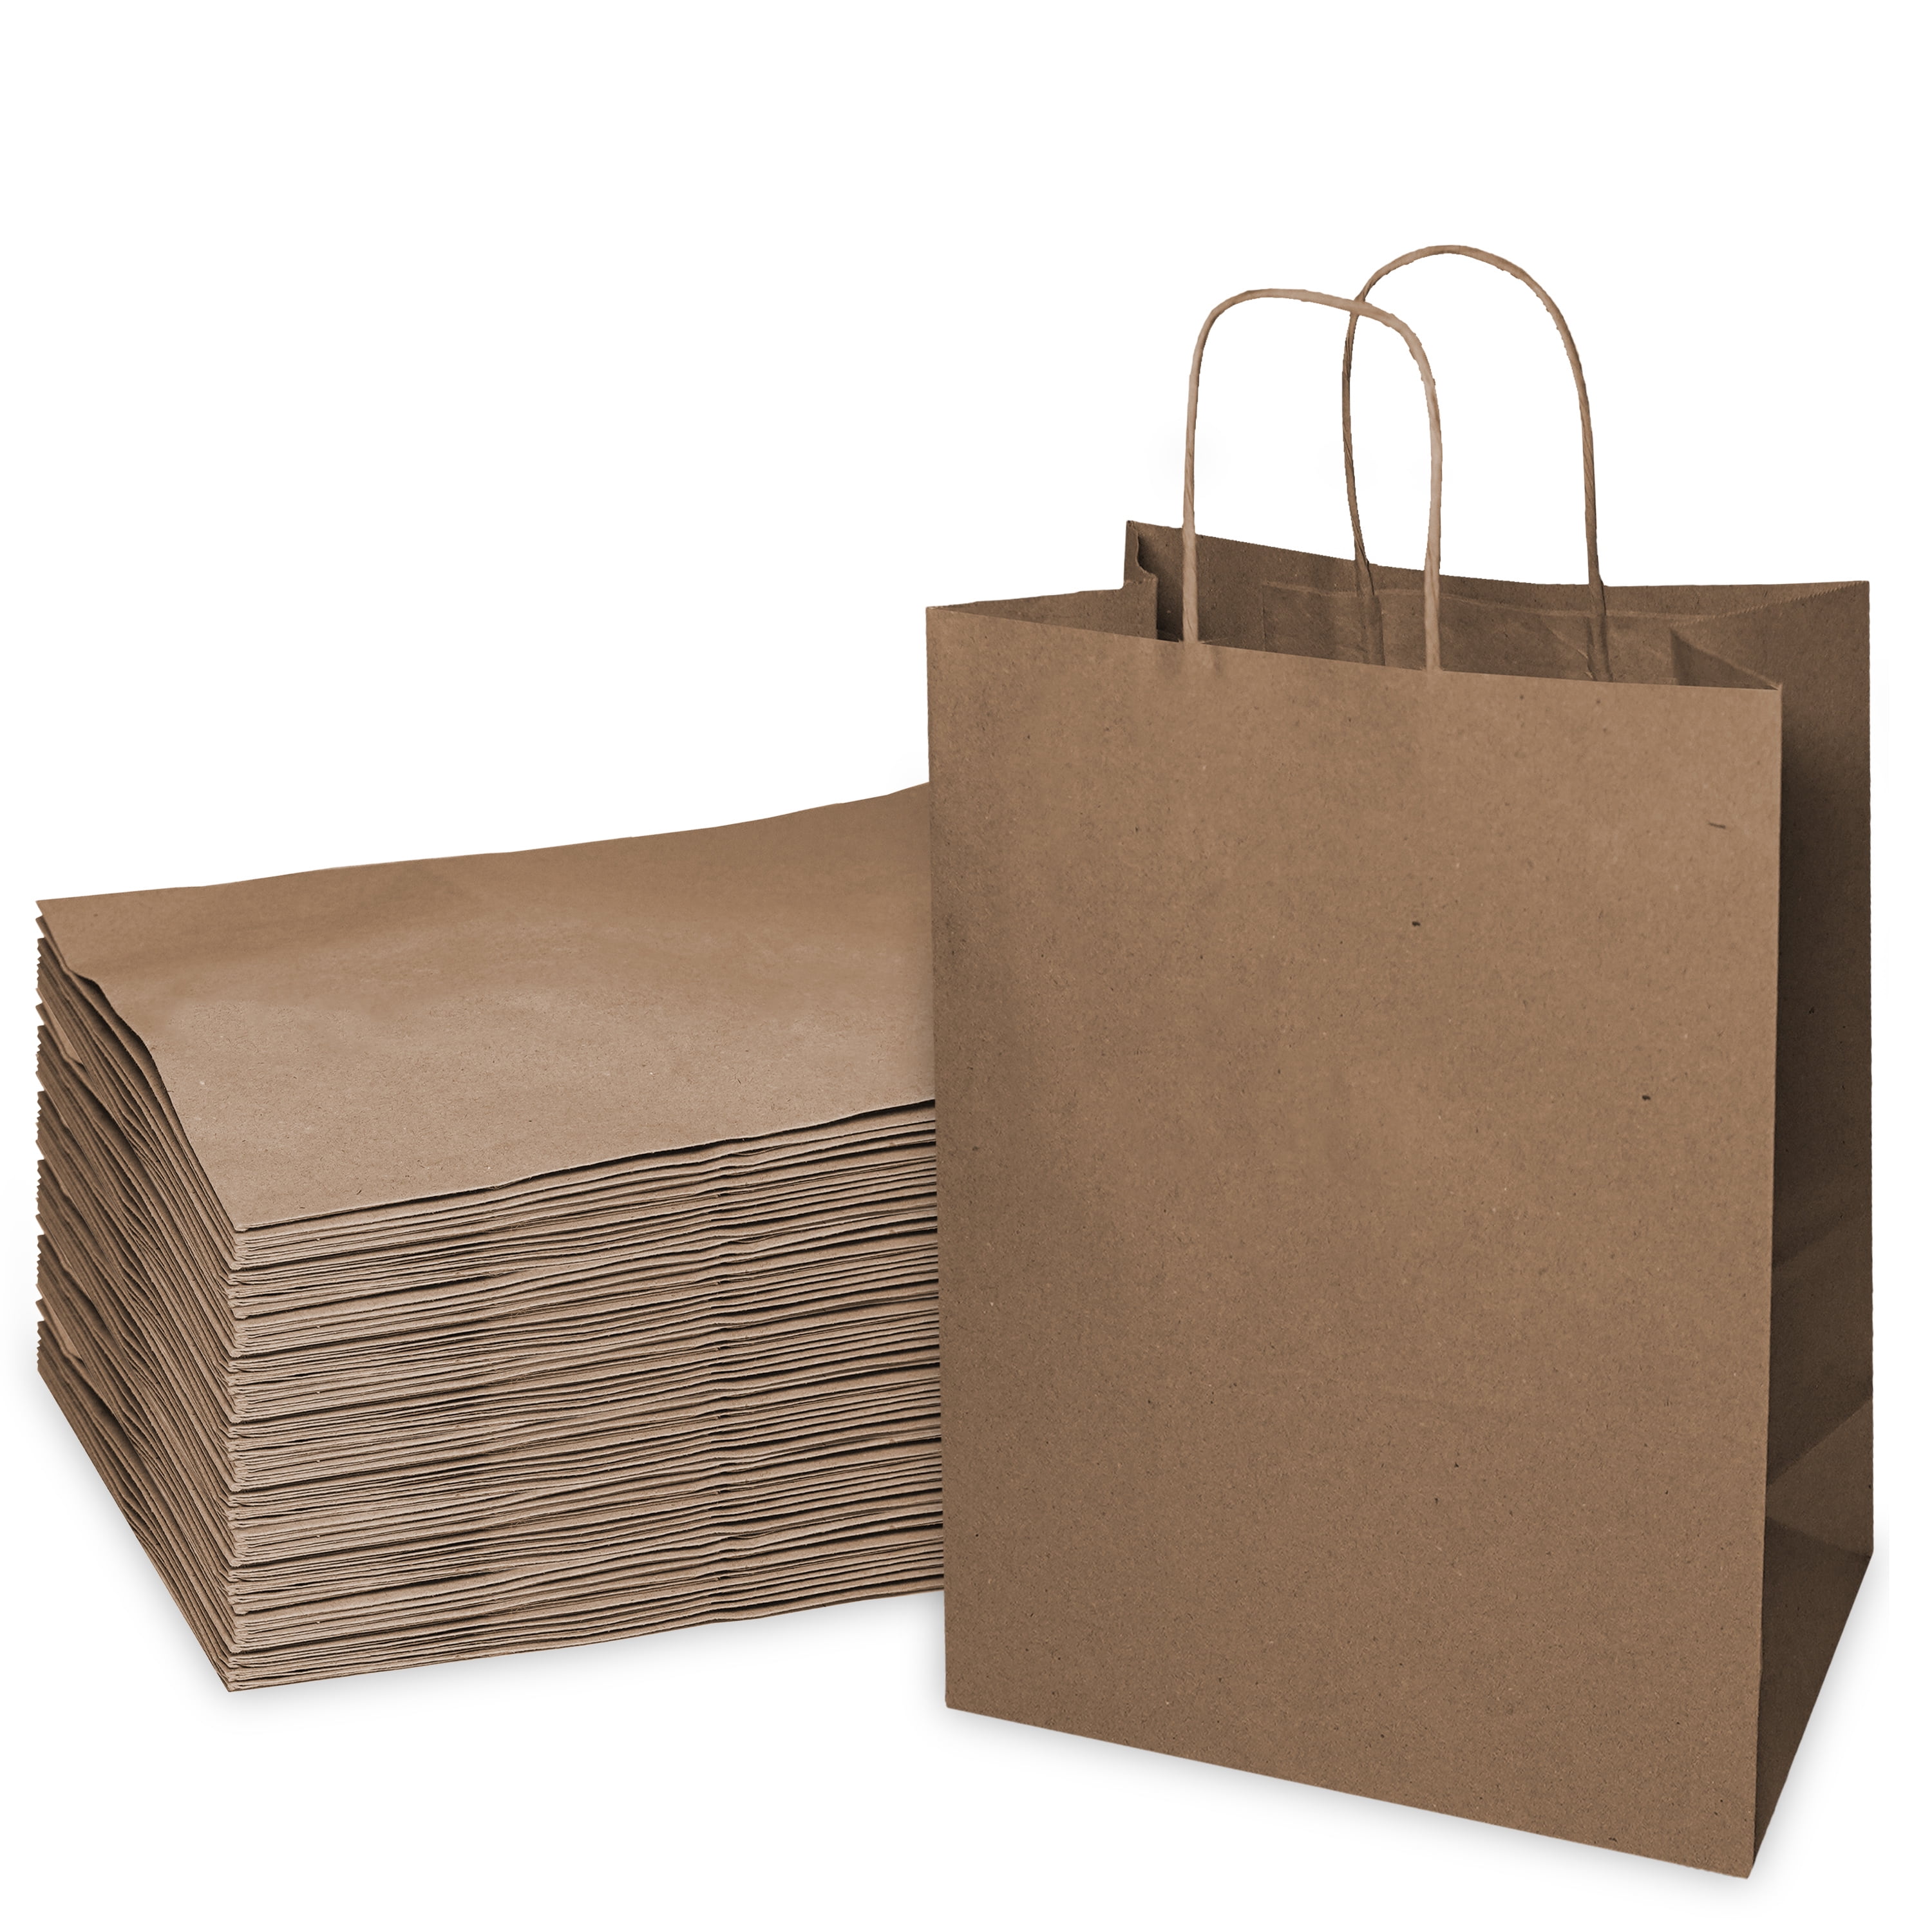 AZOWA Gift Bags Small Kraft Paper Bags with Handles (5 x 3.1 x 8.2